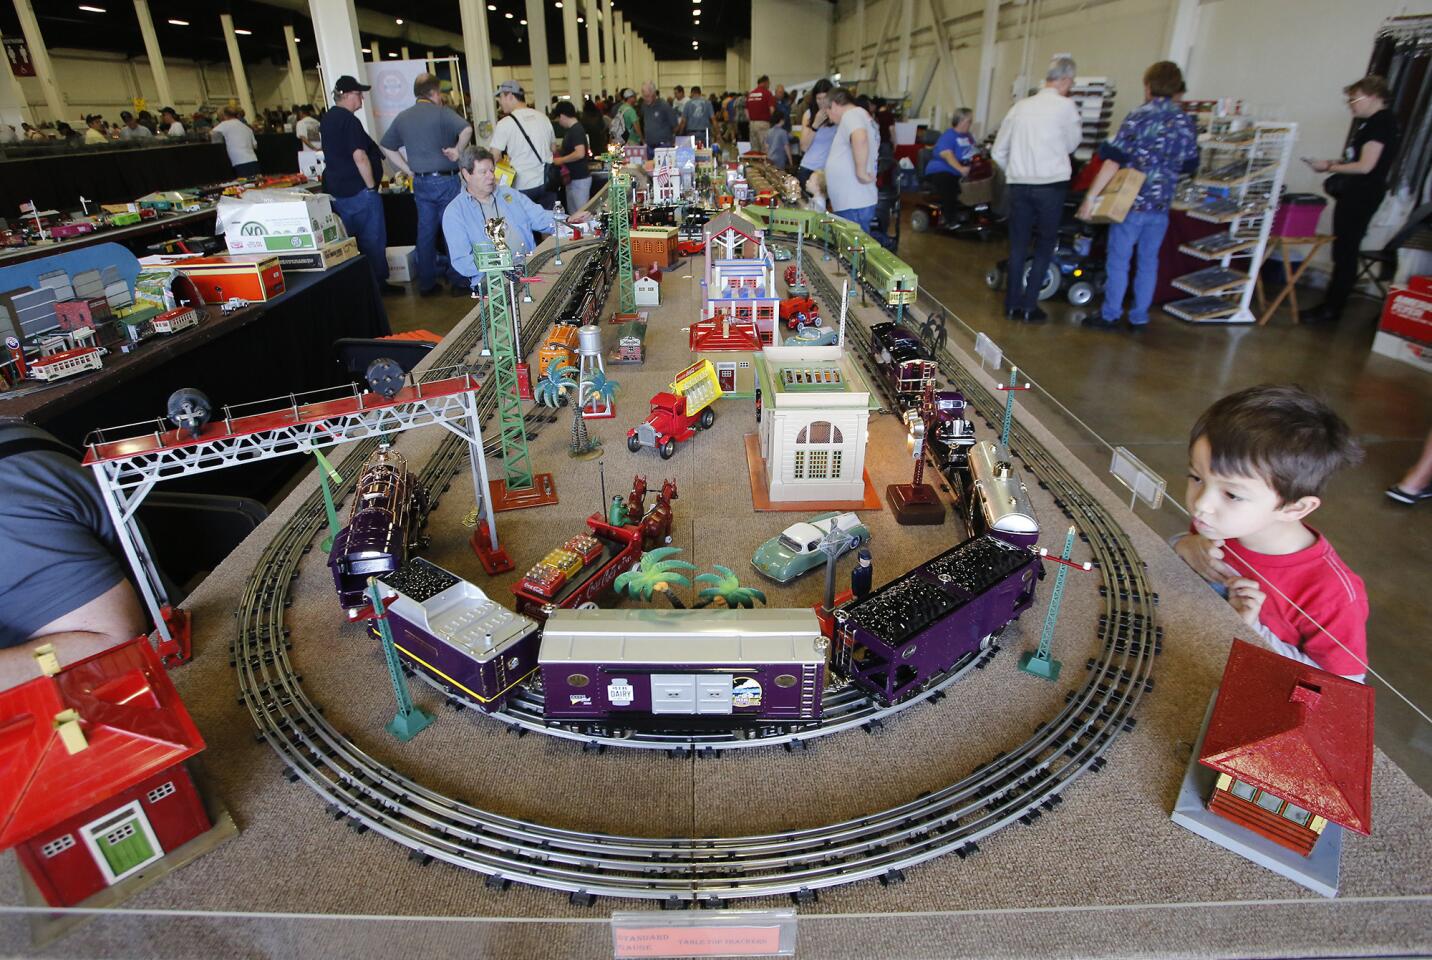 Great Train Show at OC Fair and Events Center